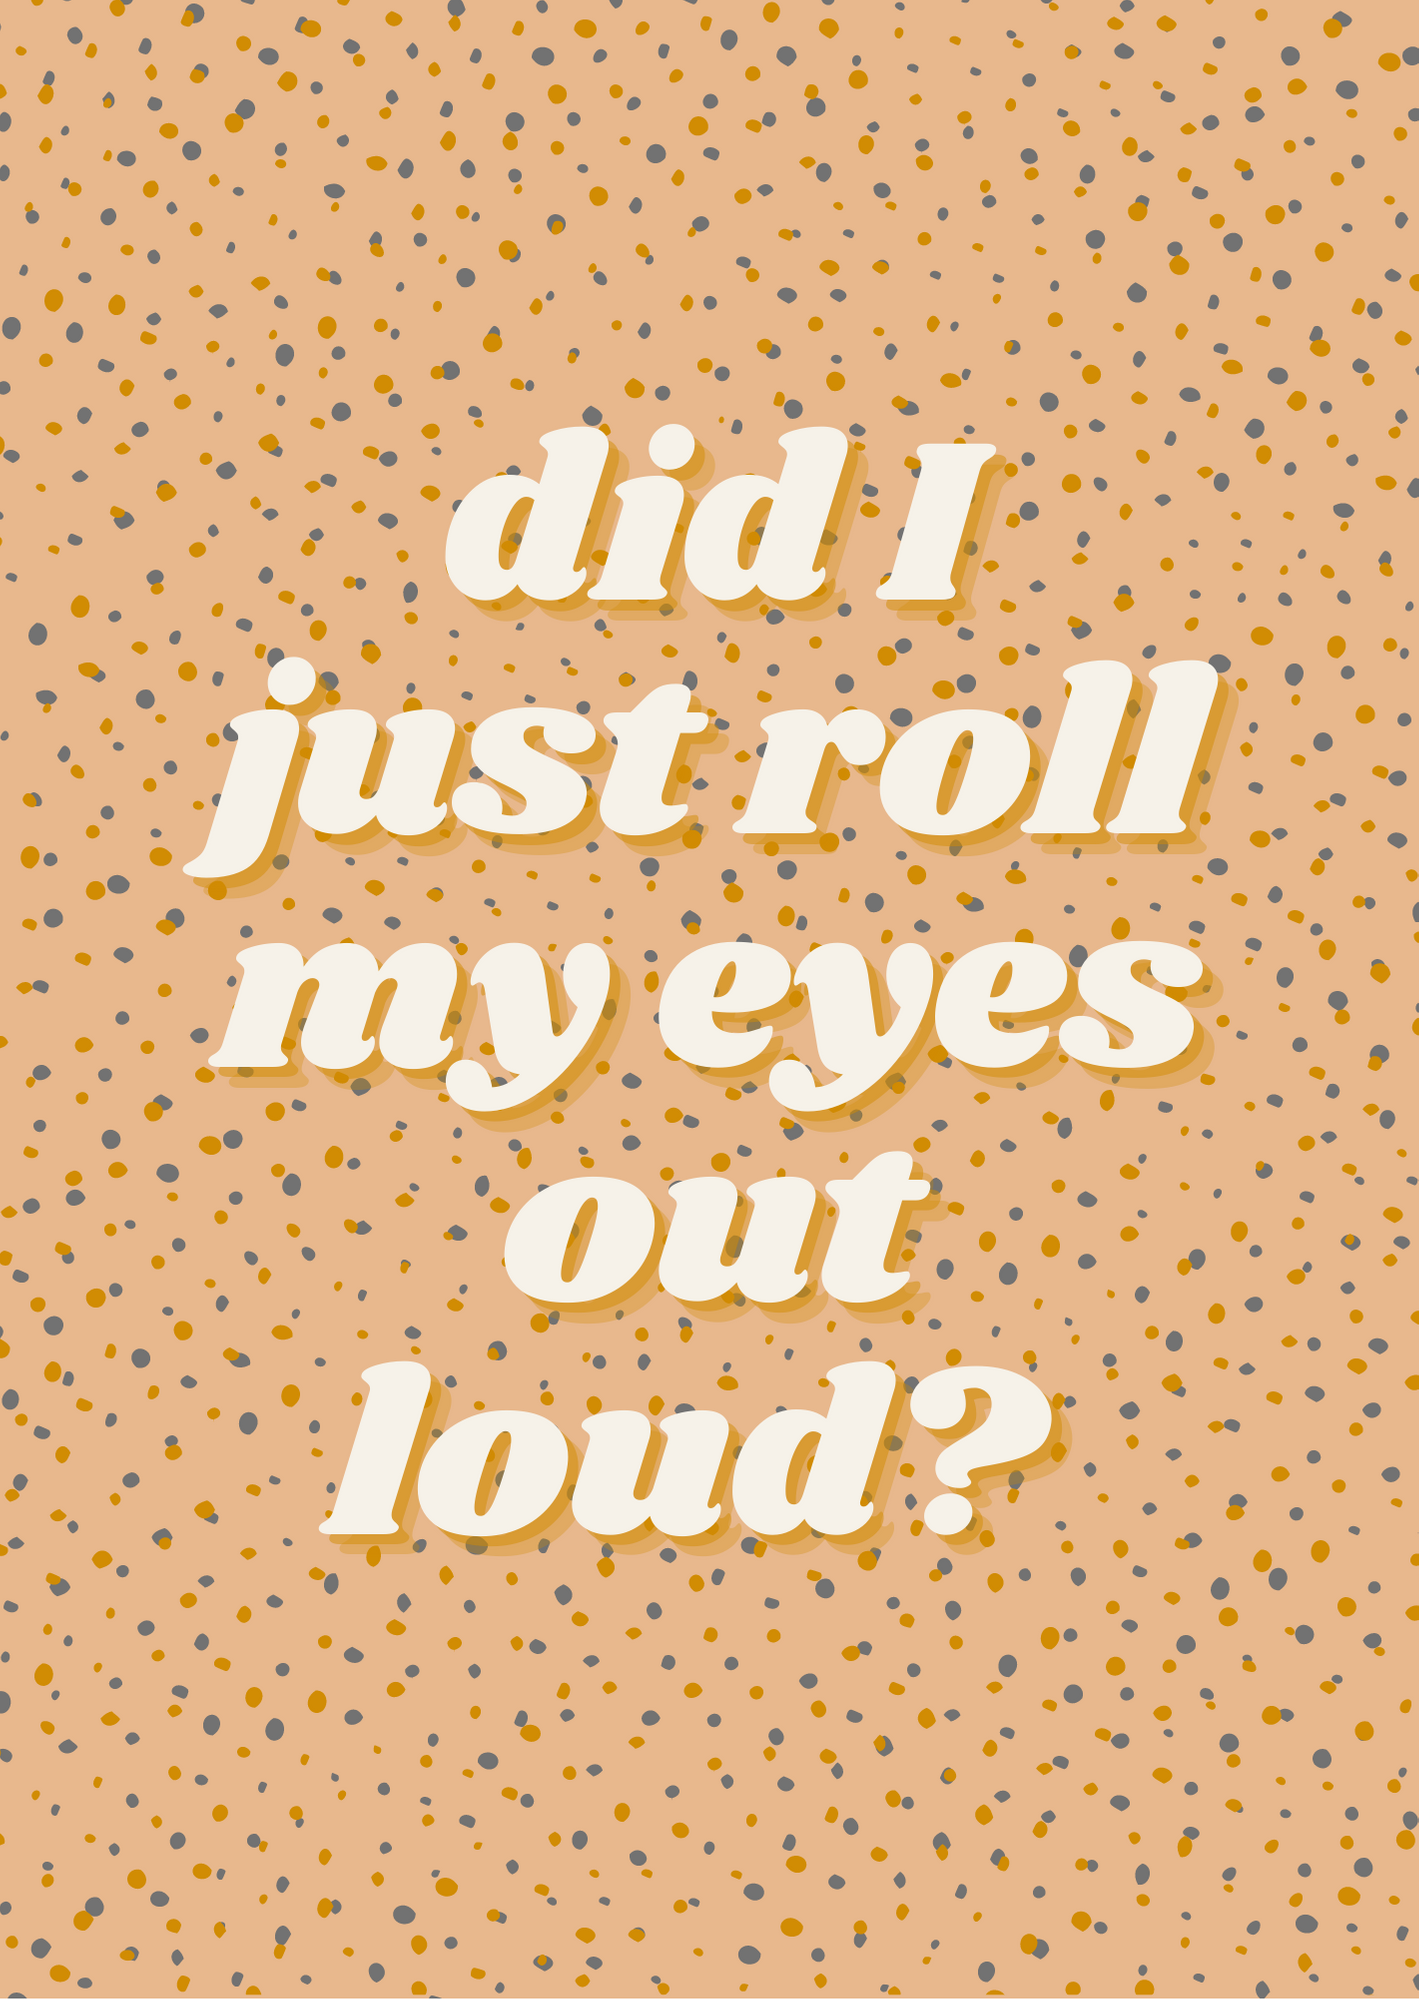 Did I roll my eyes out loud?  Print /Wall Art